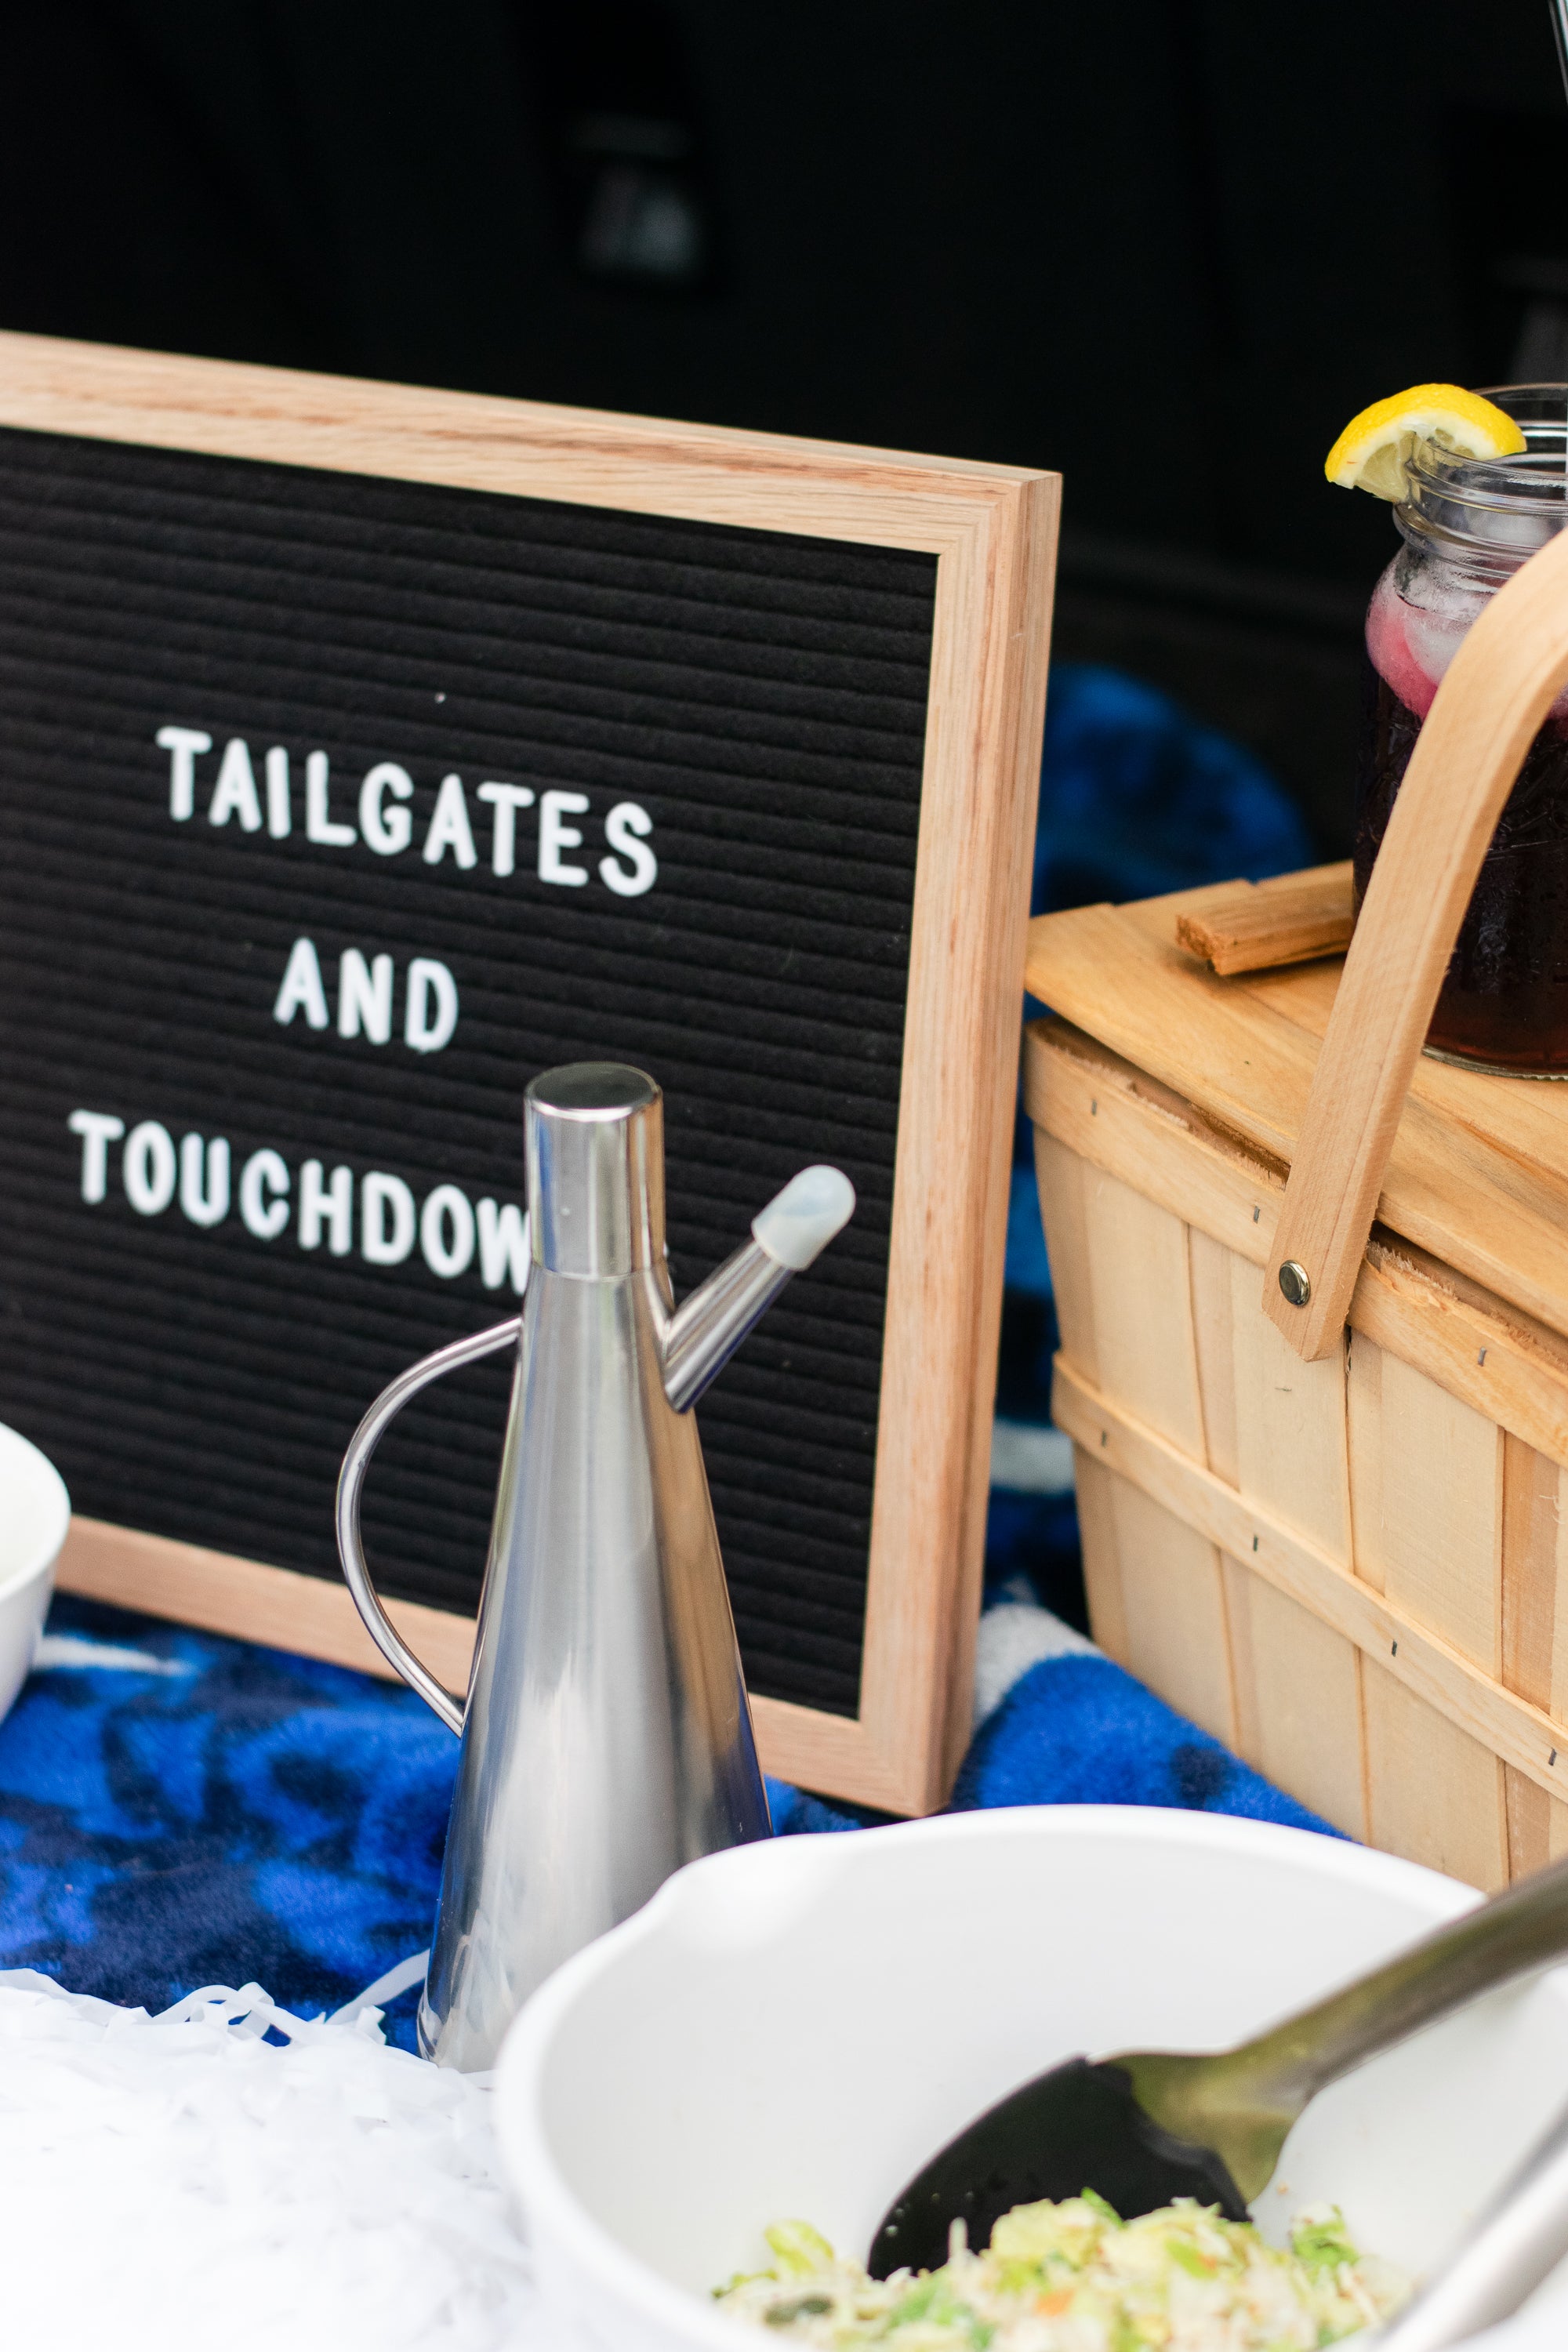 Tailgates and touchdowns with Olipac olive oil cruet